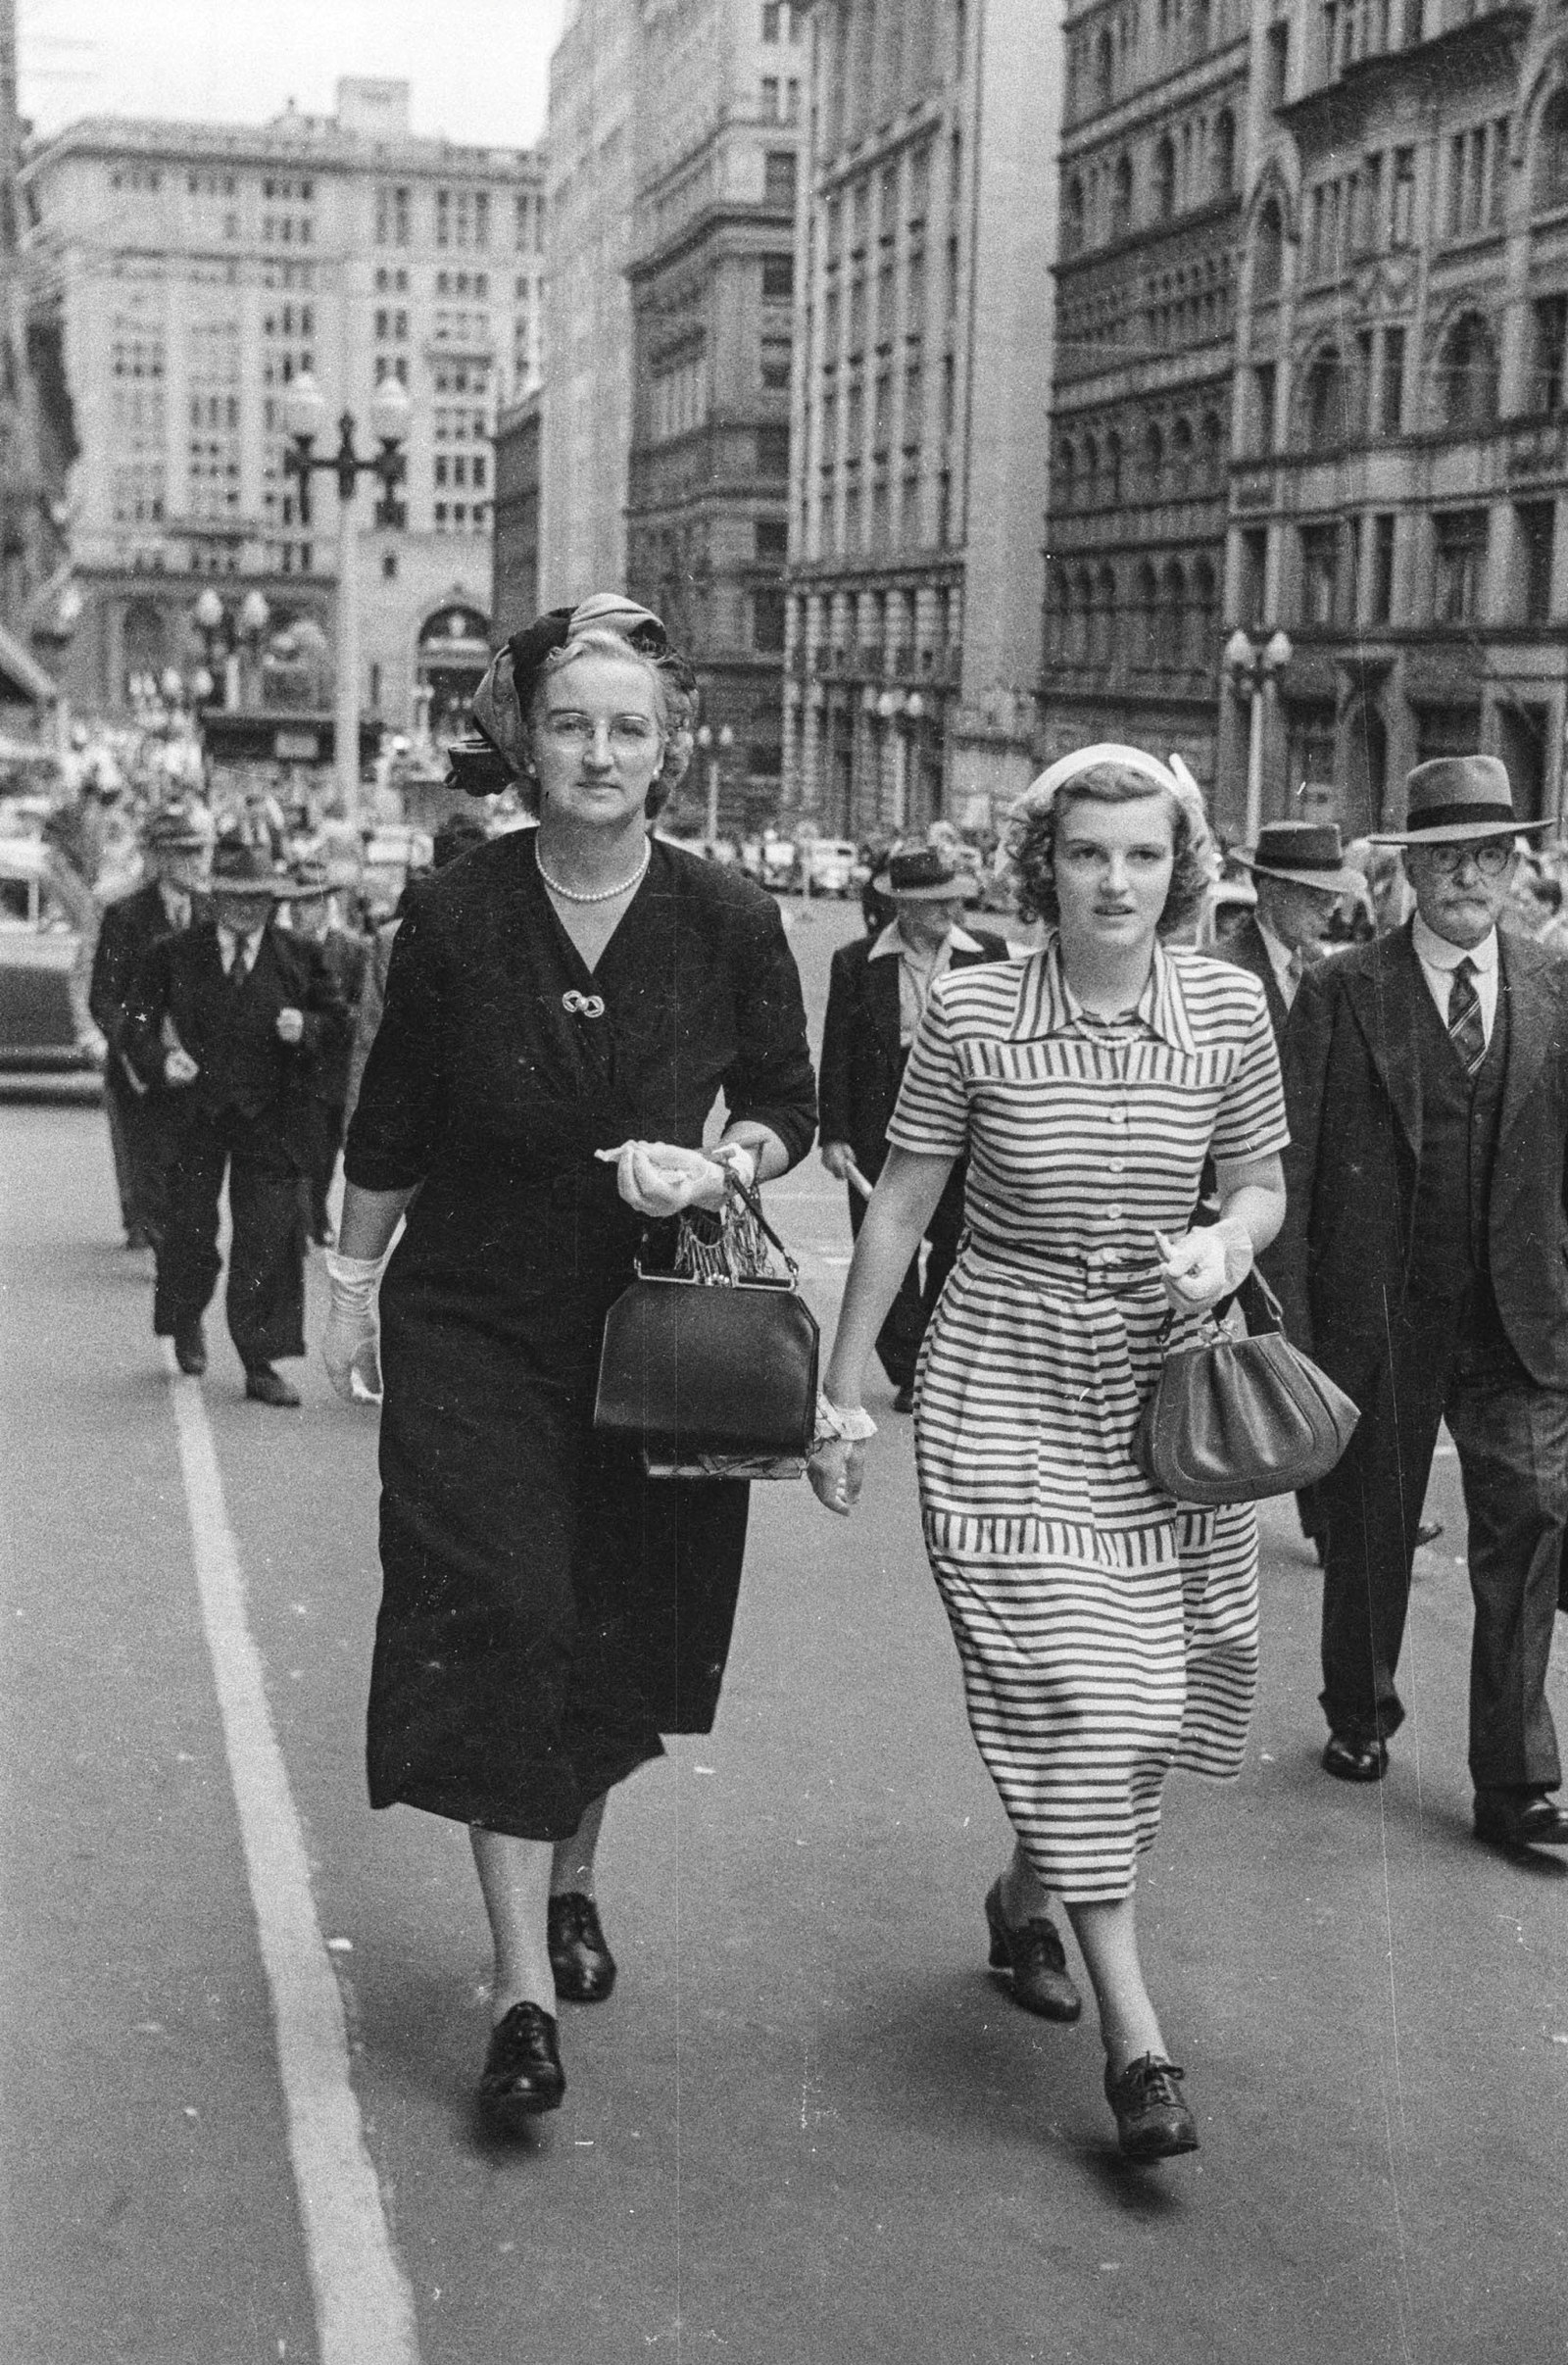 Black & white candid photo of people walking down city street.